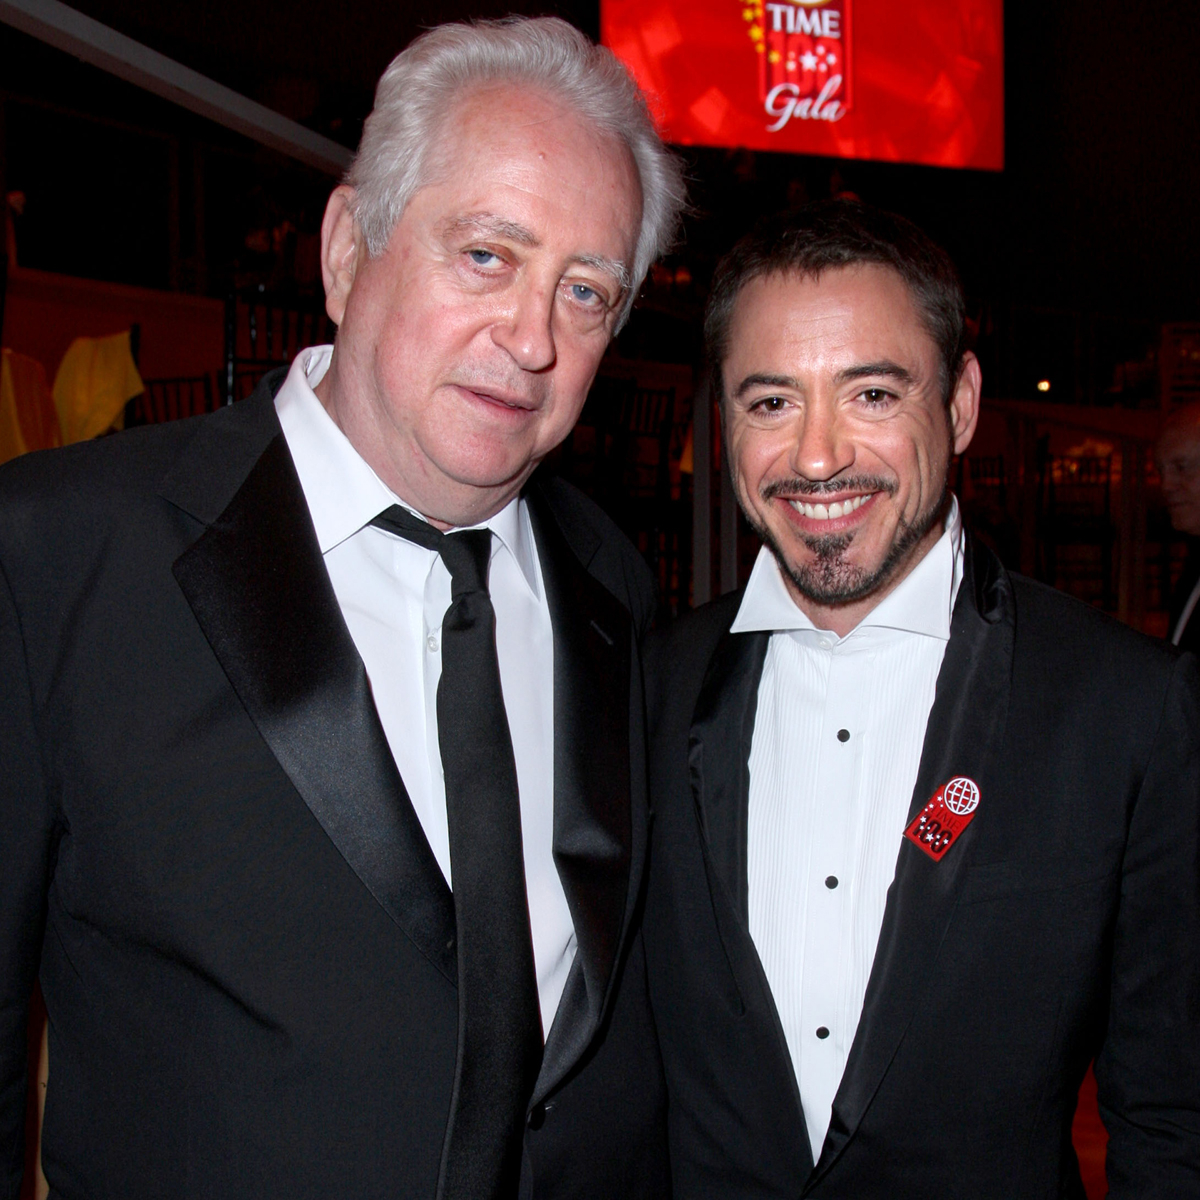 Robert Downey Jr. Mourns the Death of His Father Robert Downey Sr.